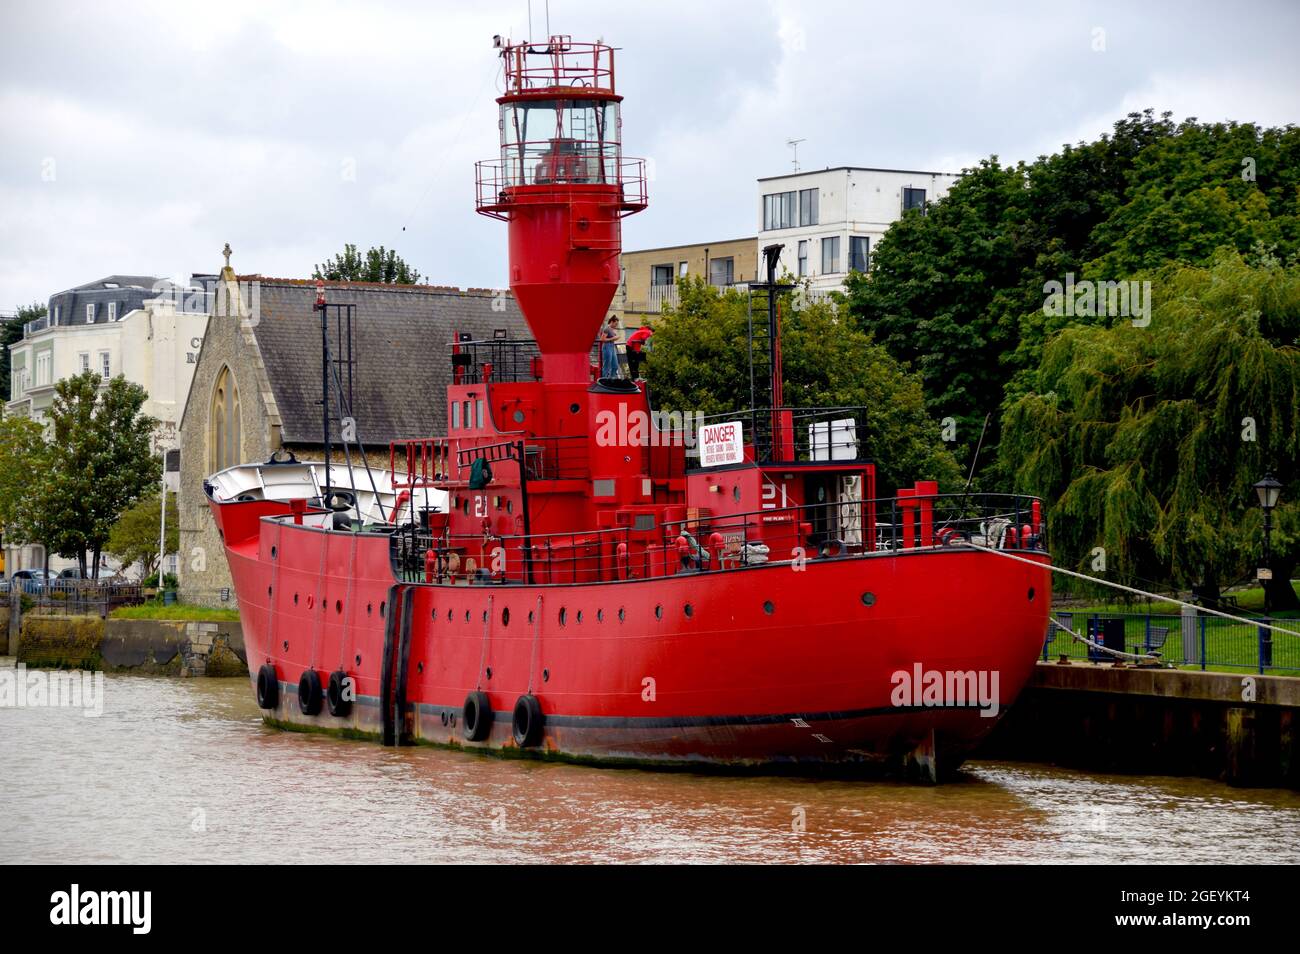 22/08/2021 Gravesend UK Today is International Lighthouse & Lightship Heritage Weekend and Gravesend’s own Light Vessel LV 21 had her gangplank down a Stock Photo